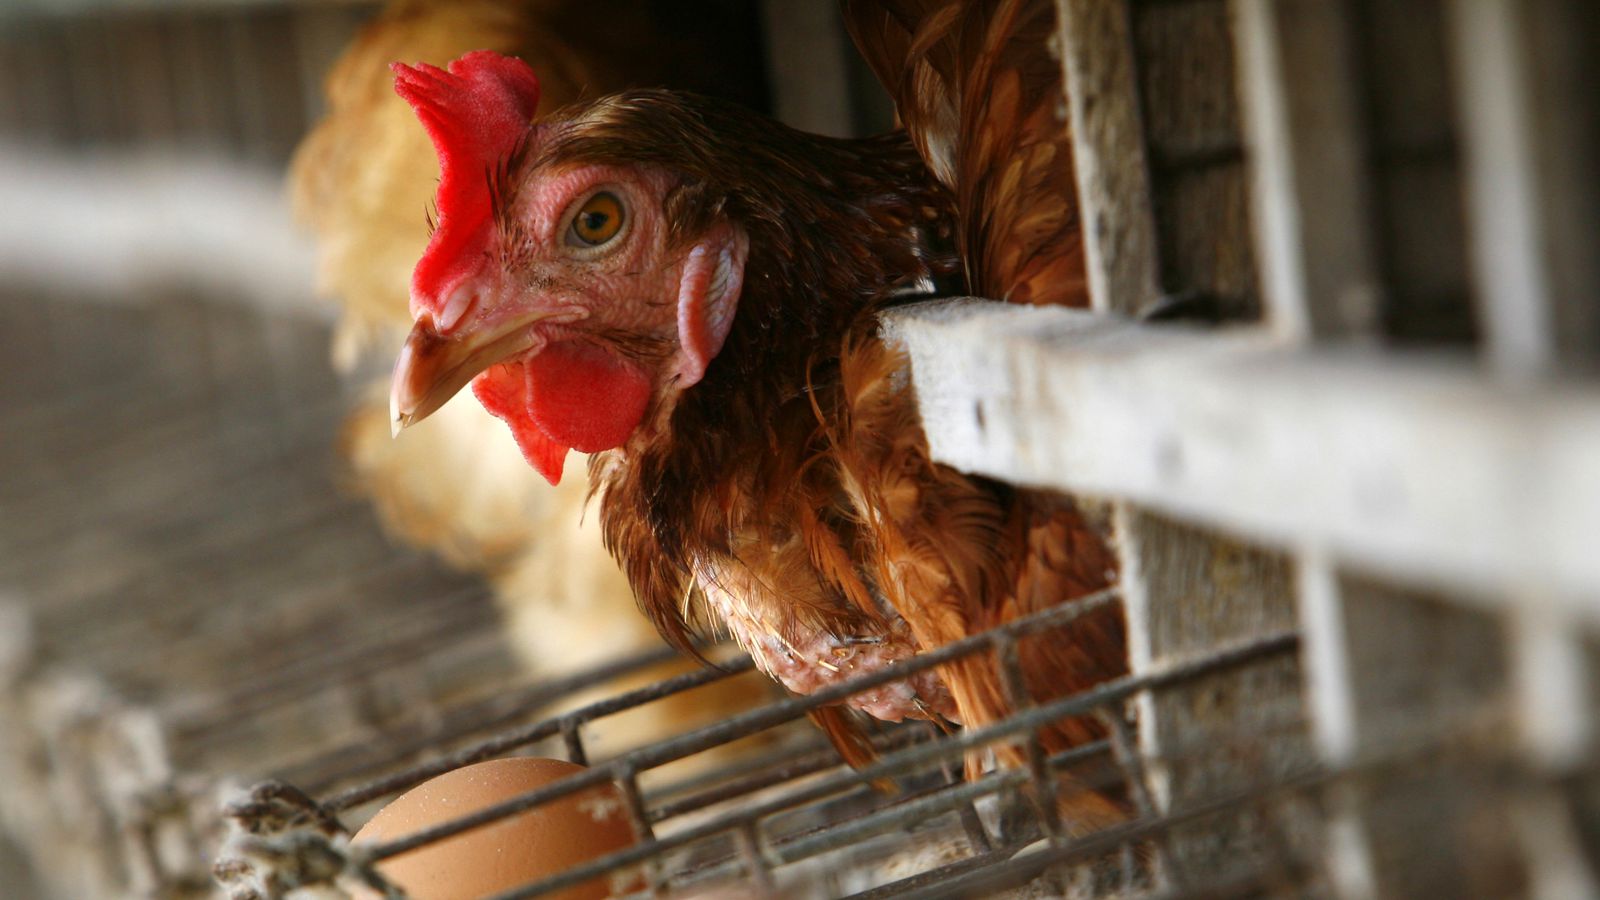 Jack in the Box Announces Switch to Cage-Free Eggs - Eater